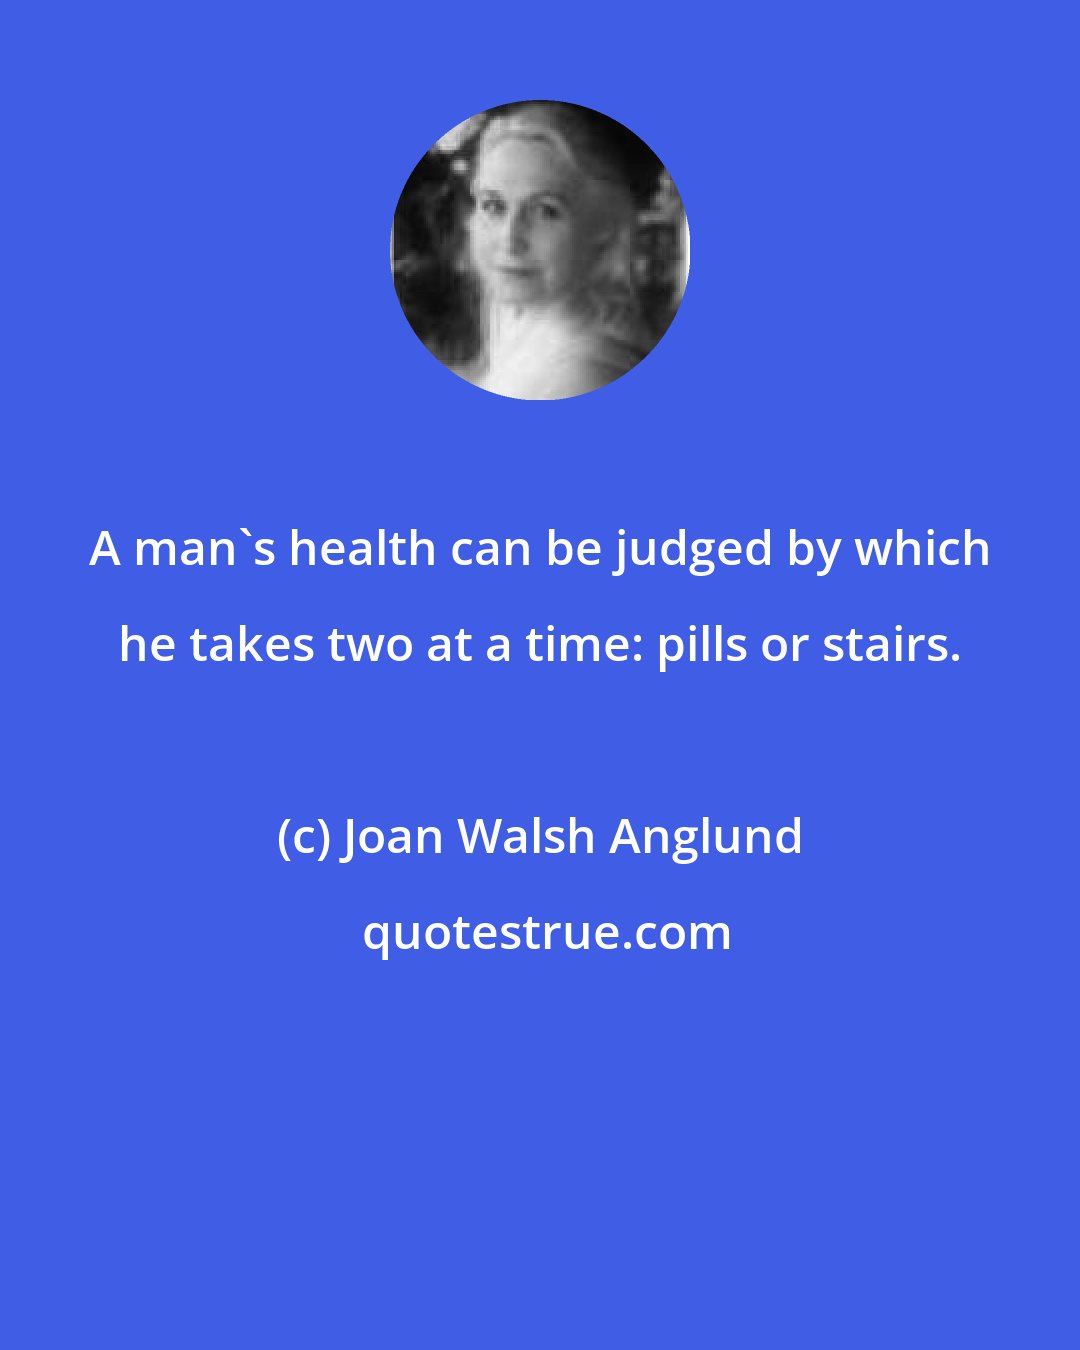 Joan Walsh Anglund: A man's health can be judged by which he takes two at a time: pills or stairs.